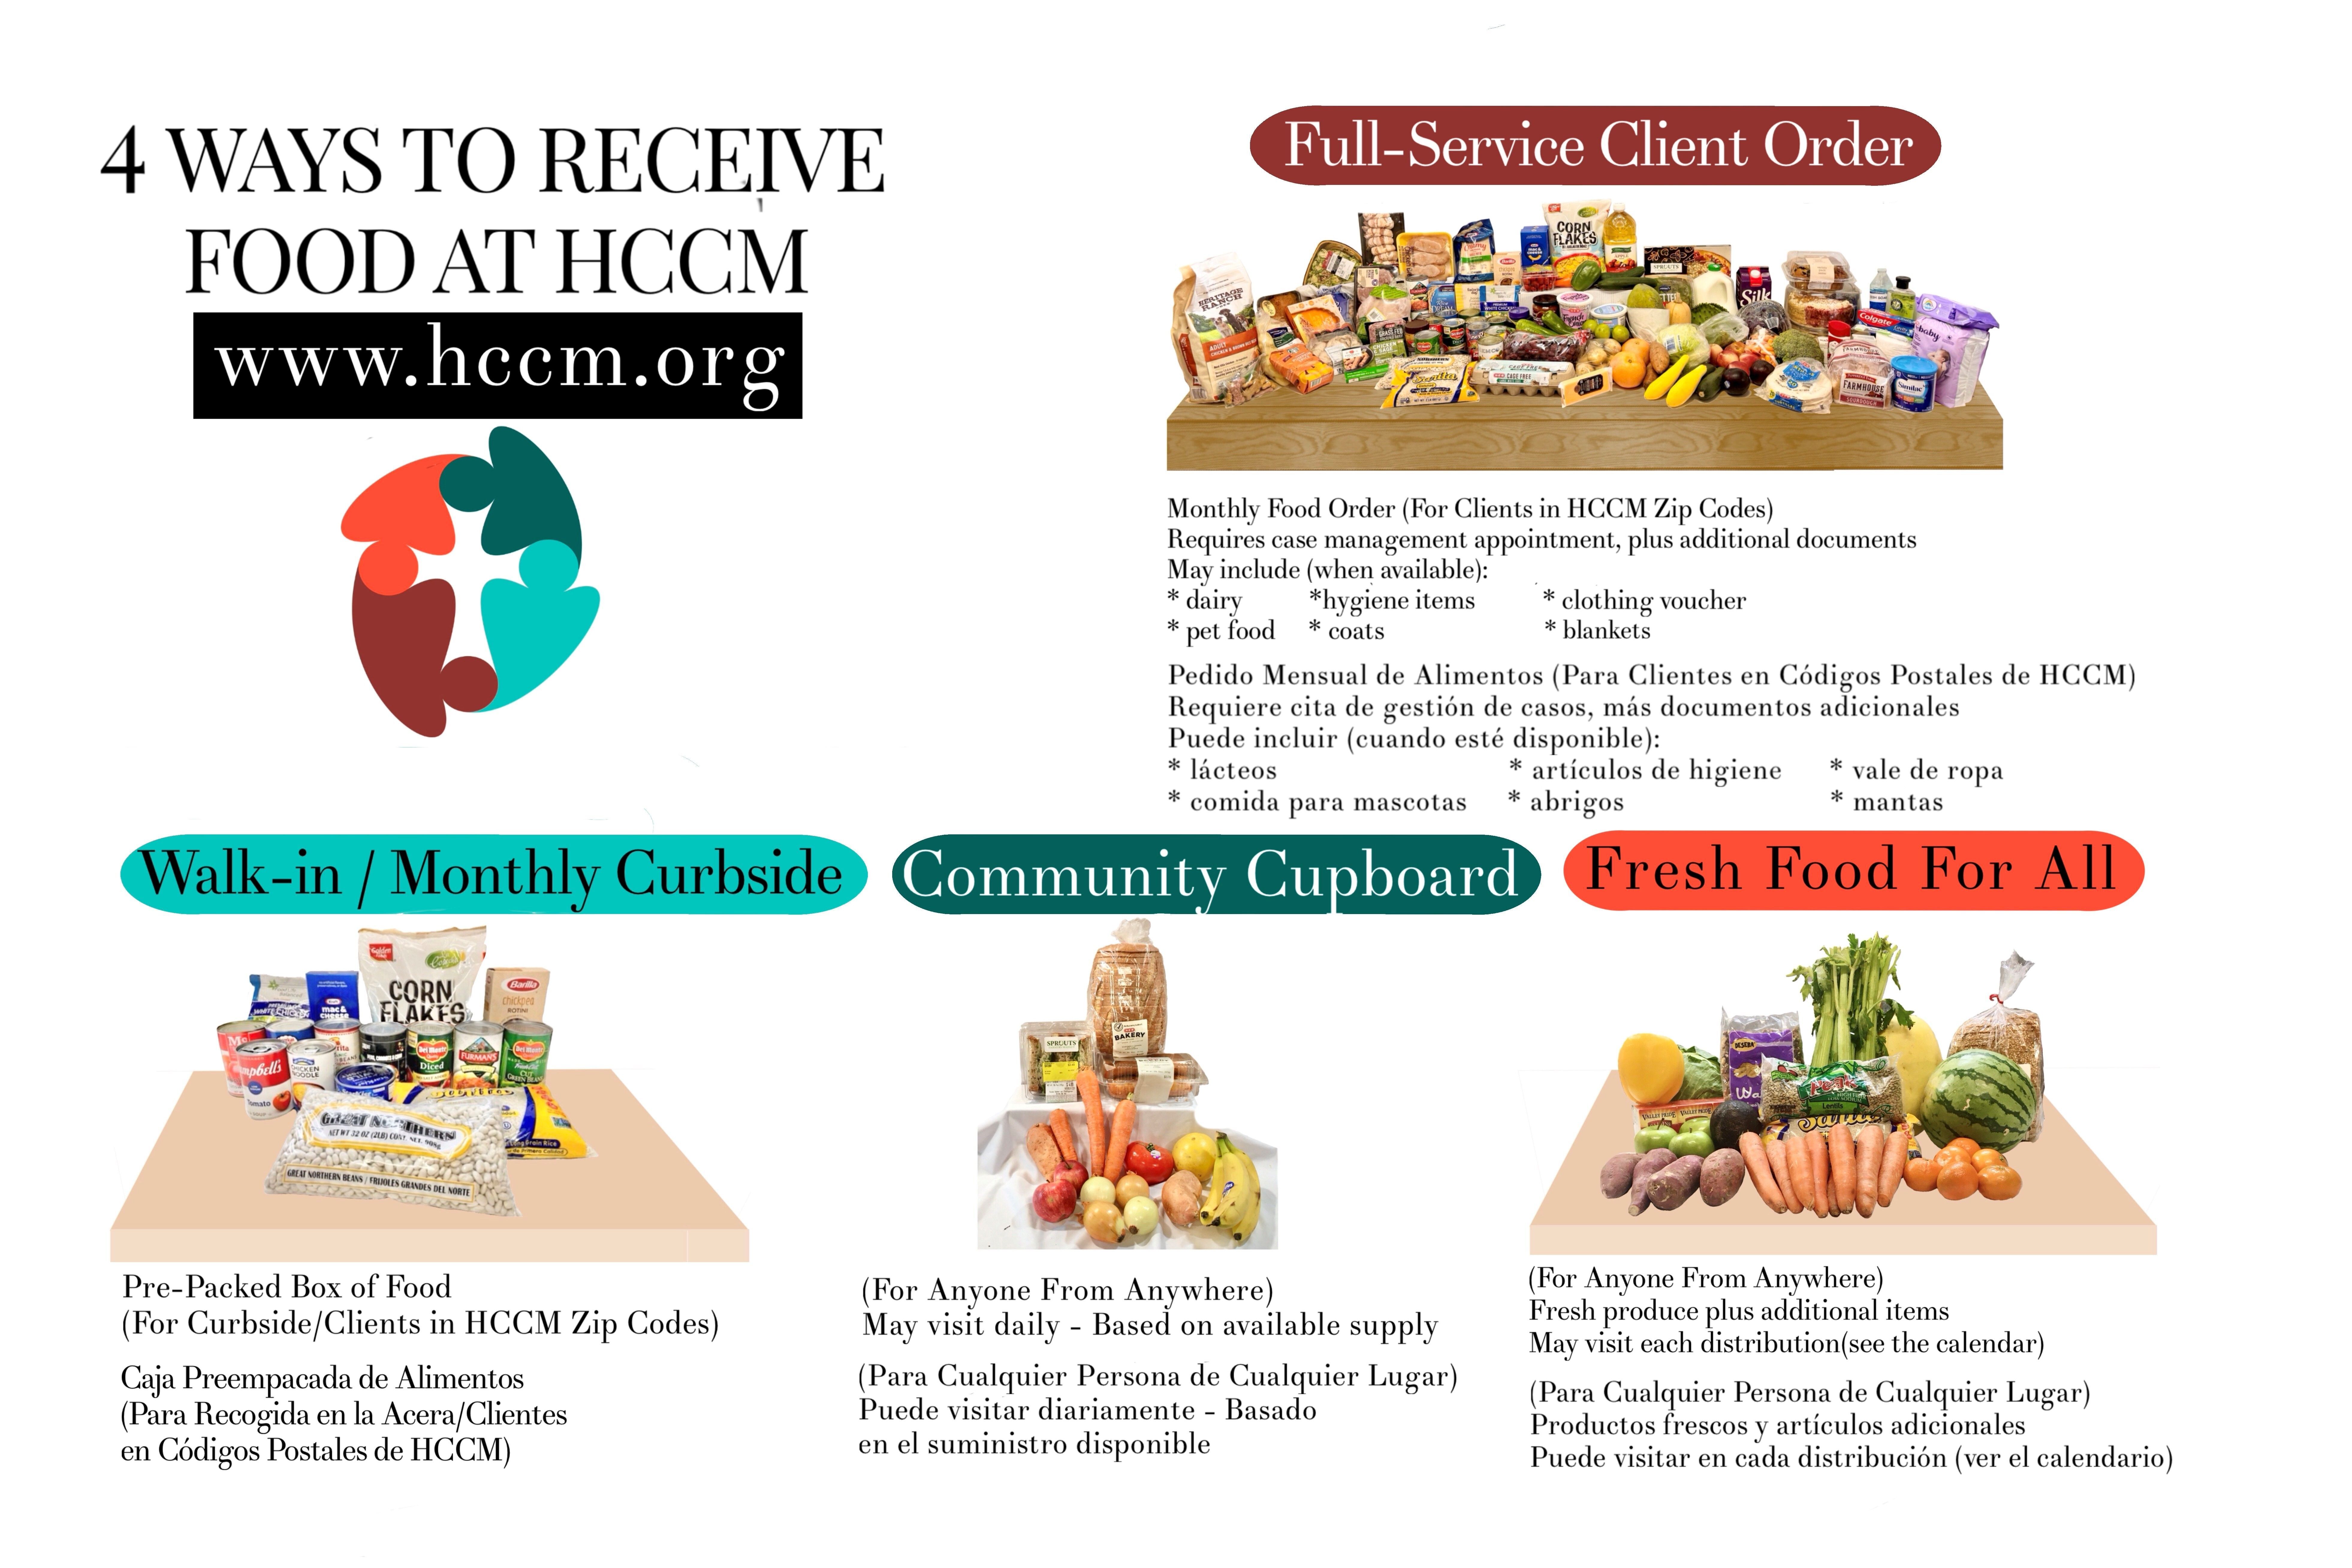 4 Ways to Receive Food Poster